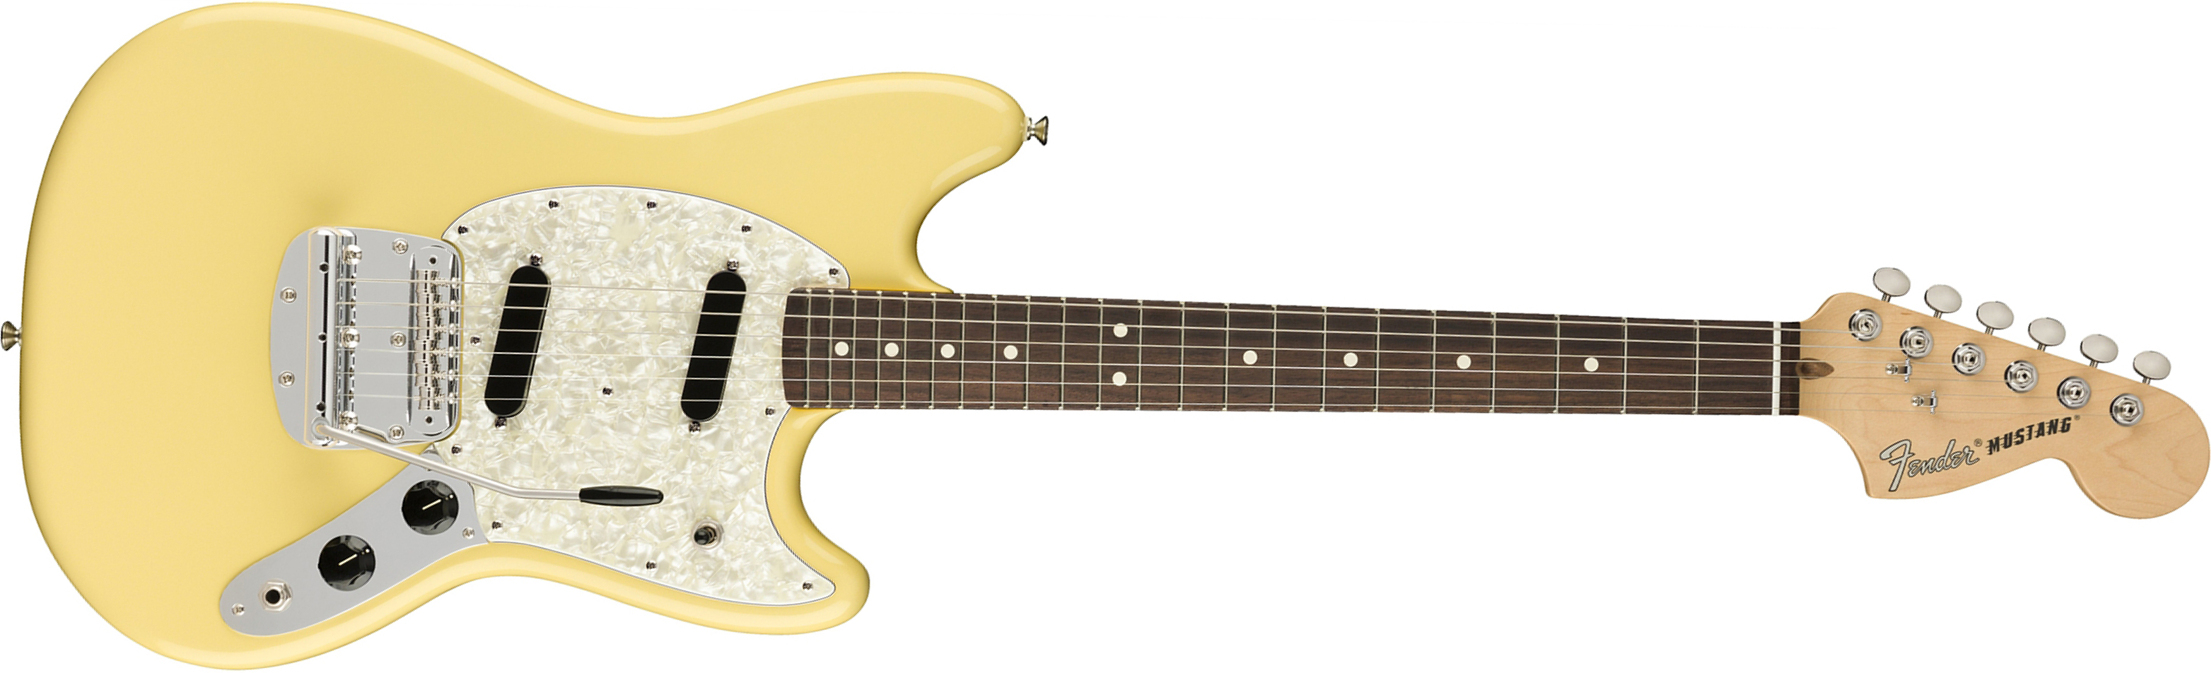 Fender Mustang American Performer Usa Ss Rw - Vintage White - Guitare Électrique Double Cut - Main picture